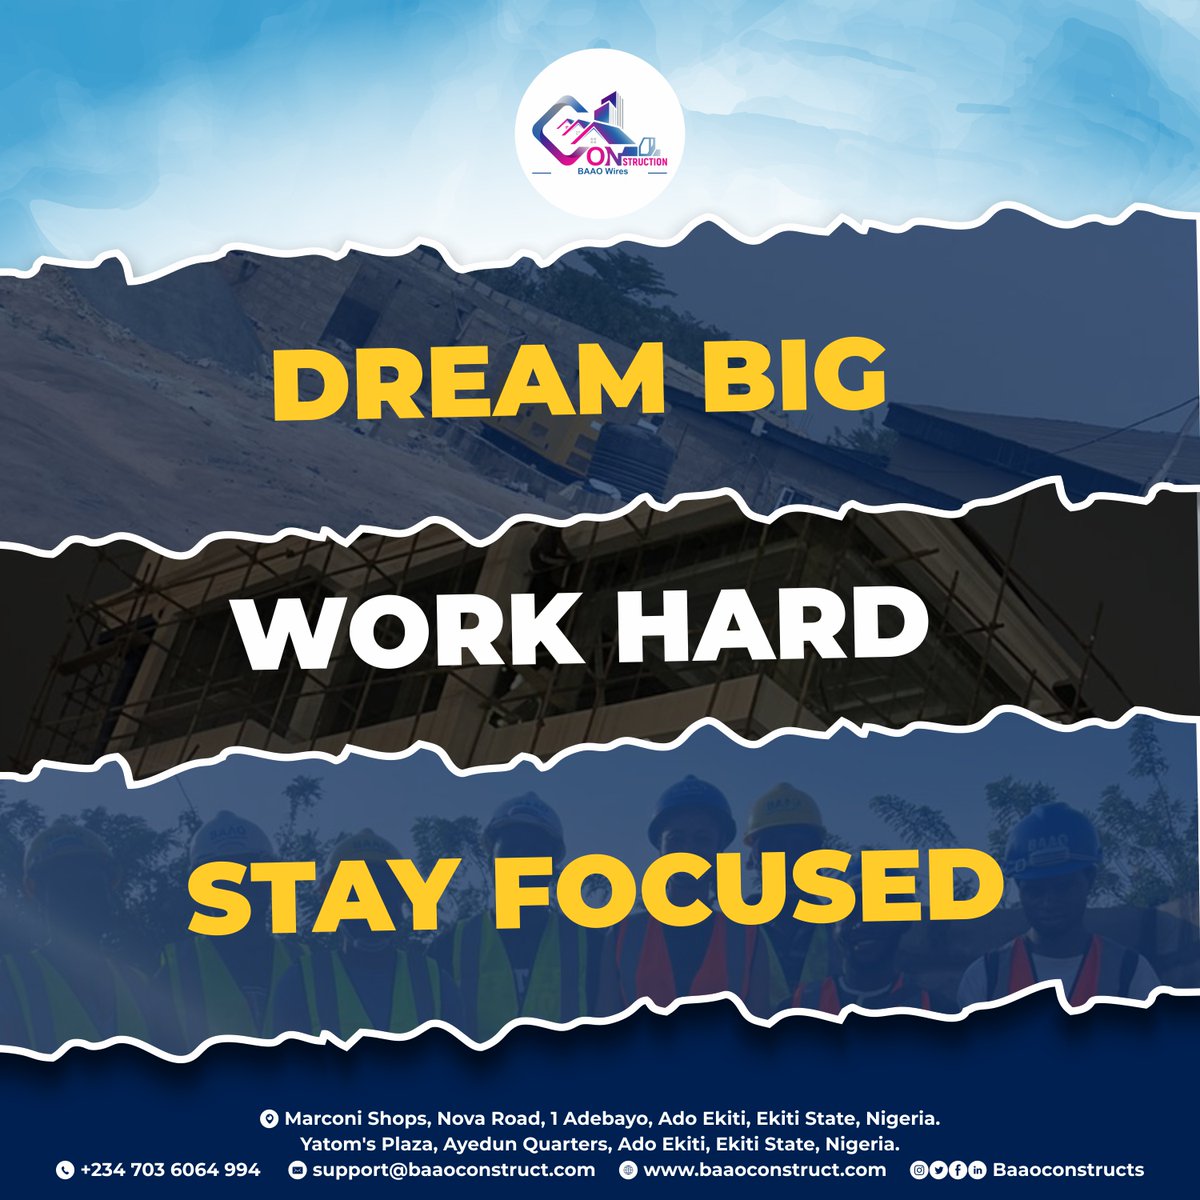 HAPPY MONDAY to Everyone, We encourage you to DREAM BIG | WORK HARD | STAY FOCUSED. 
#baaoconstructs #construction #constructionlife #engineering #solar #building #wiring #satelite #engineer #whychooseus #experience #bestmaterials #professionalstandards #Tiling #Painting #AC